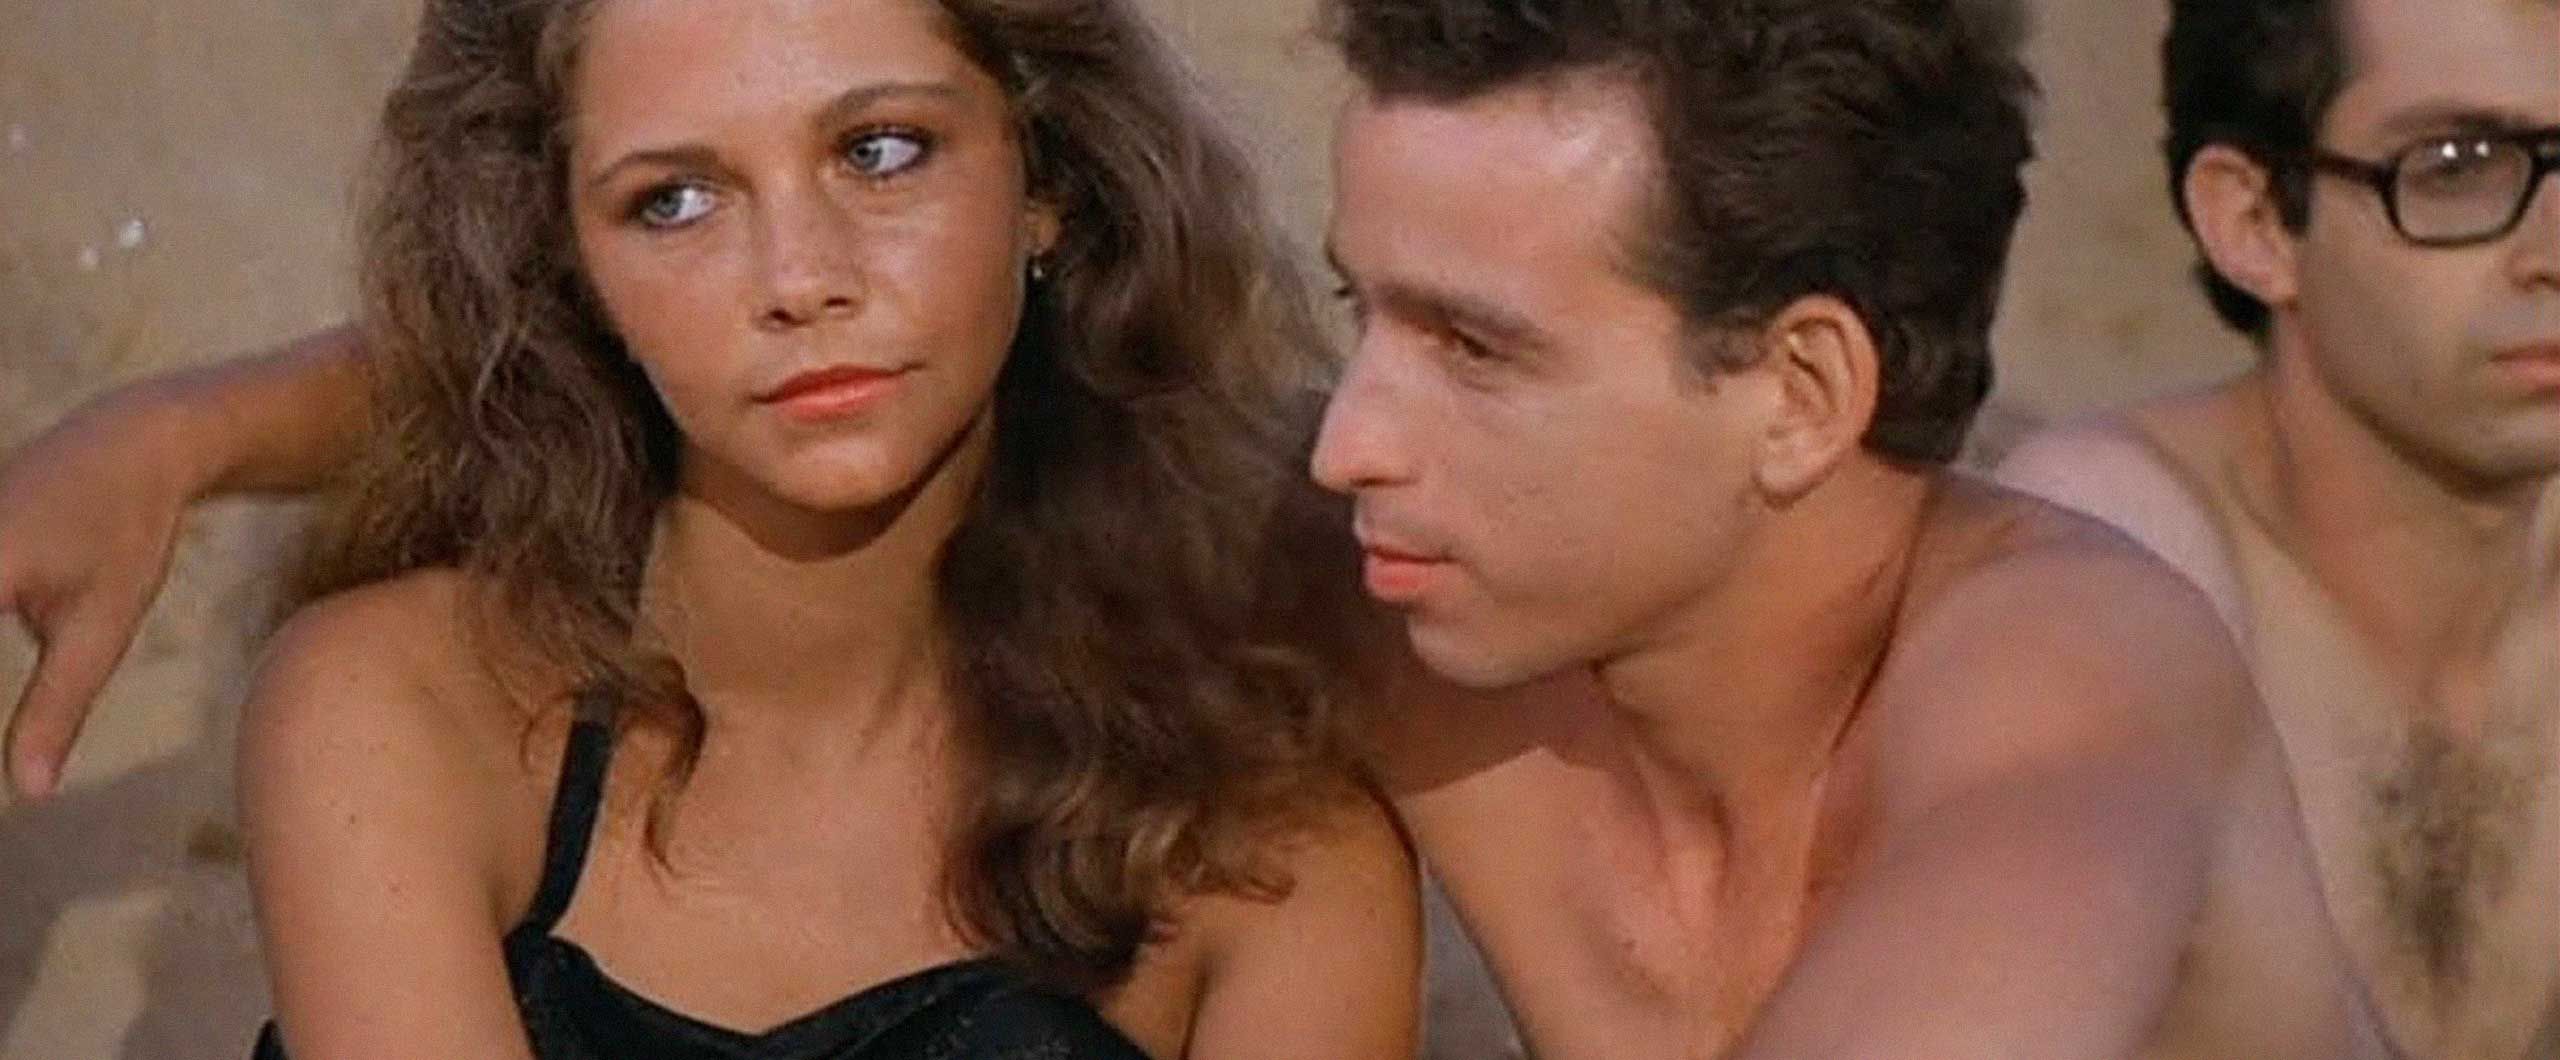 1970s German Comedy - How a Cult Israeli Drama Became a German Soft-Porn Series - Tablet Magazine